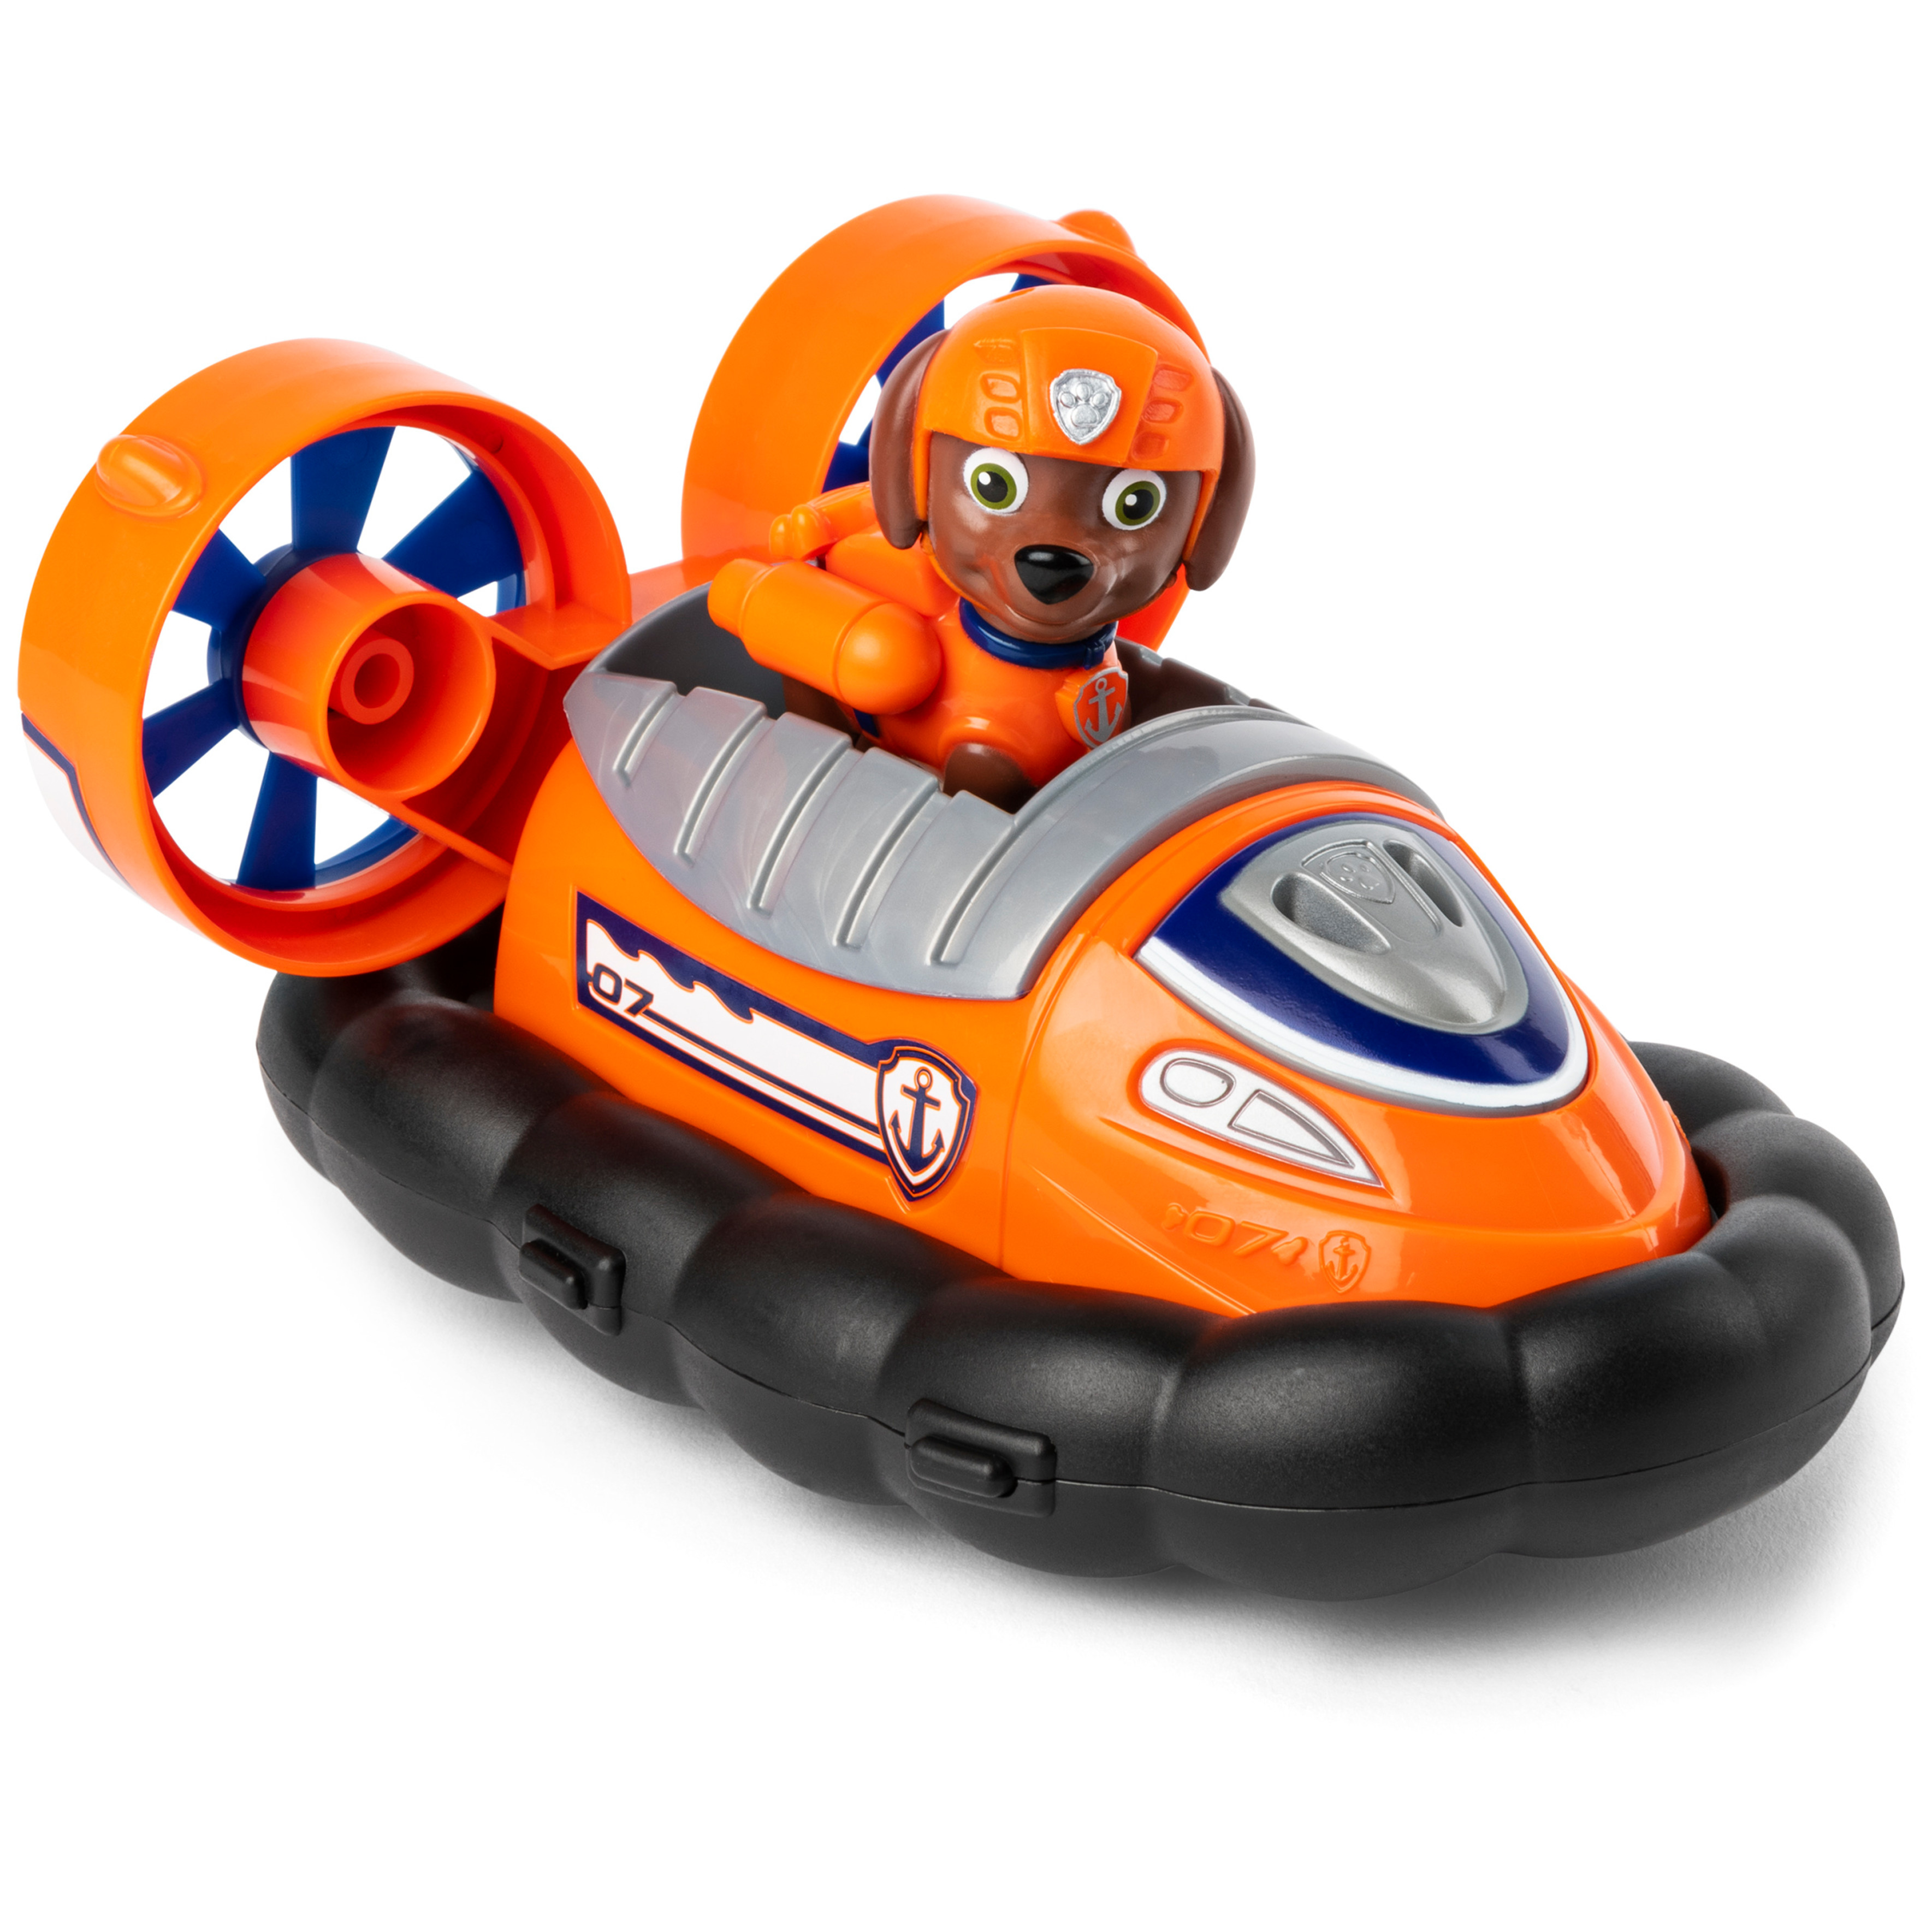 PAW Patrol, Zuma’s Hovercraft Vehicle with Collectible Figure, for Kids Aged 3 and Up - image 4 of 6